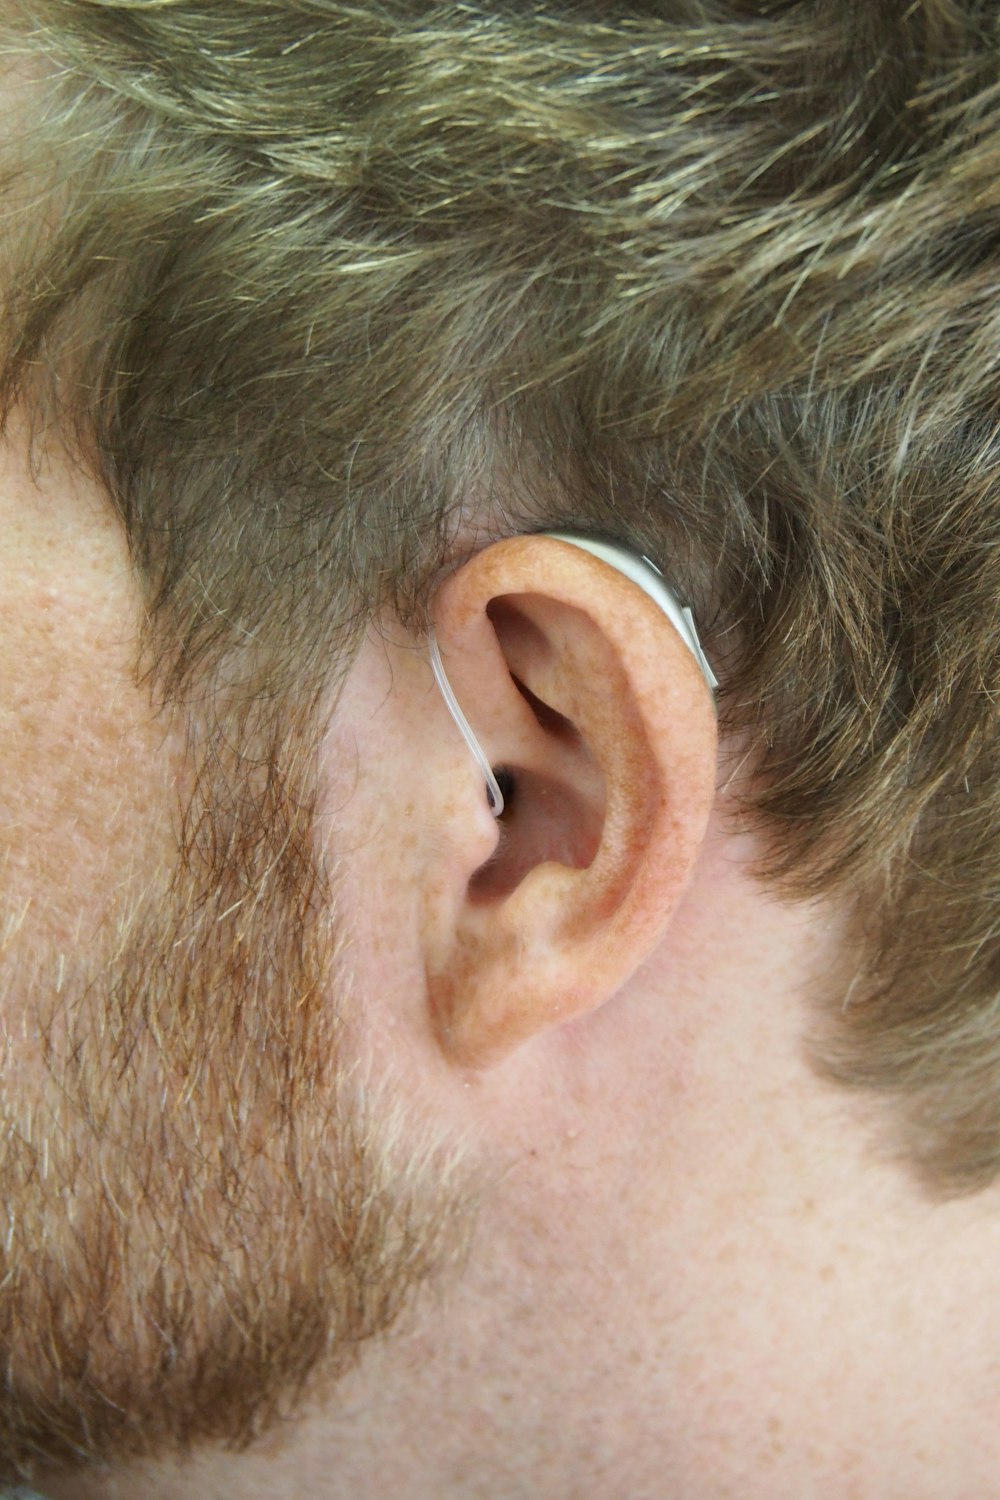 a close up of a man's ear with a pair of earplug